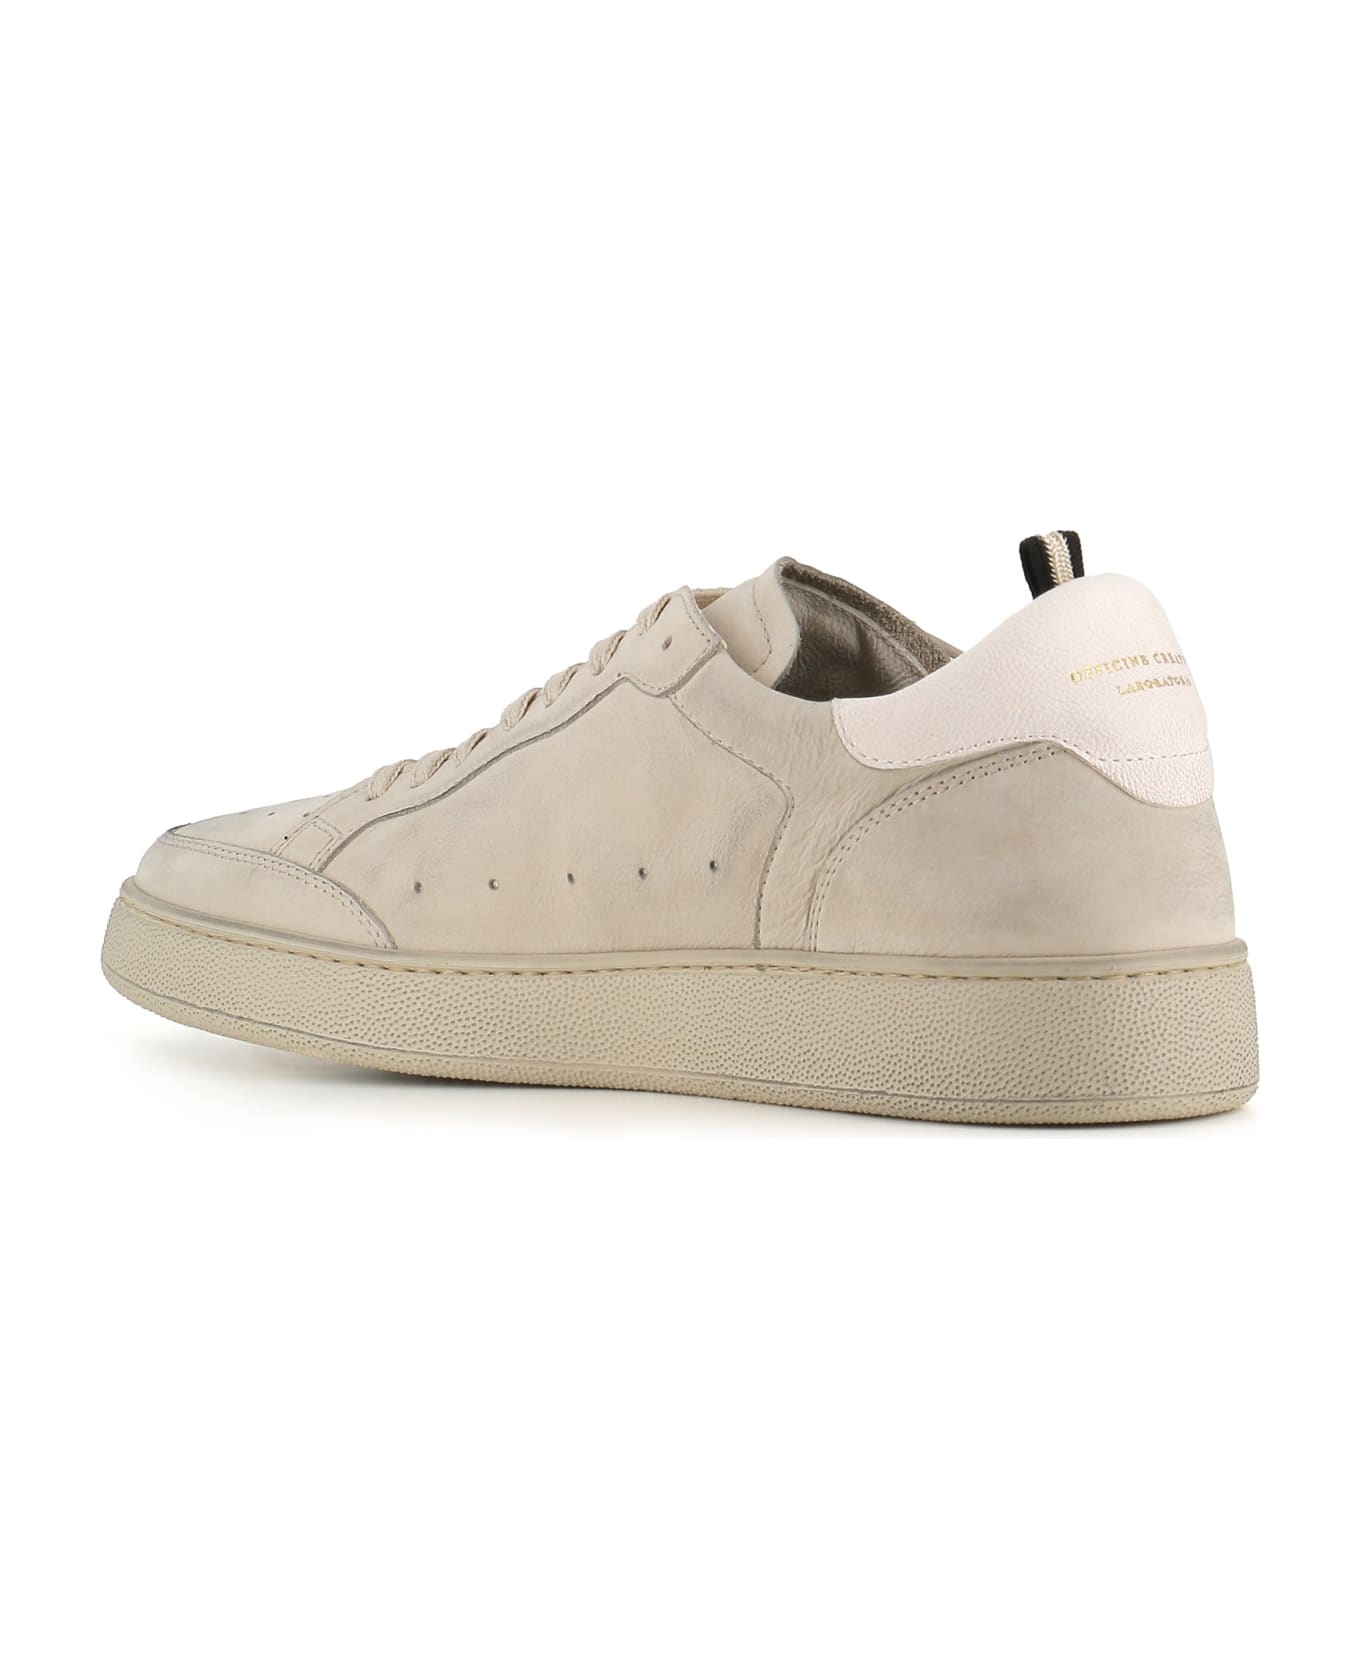 Officine Creative Sneaker The Answer/005 - Light grey